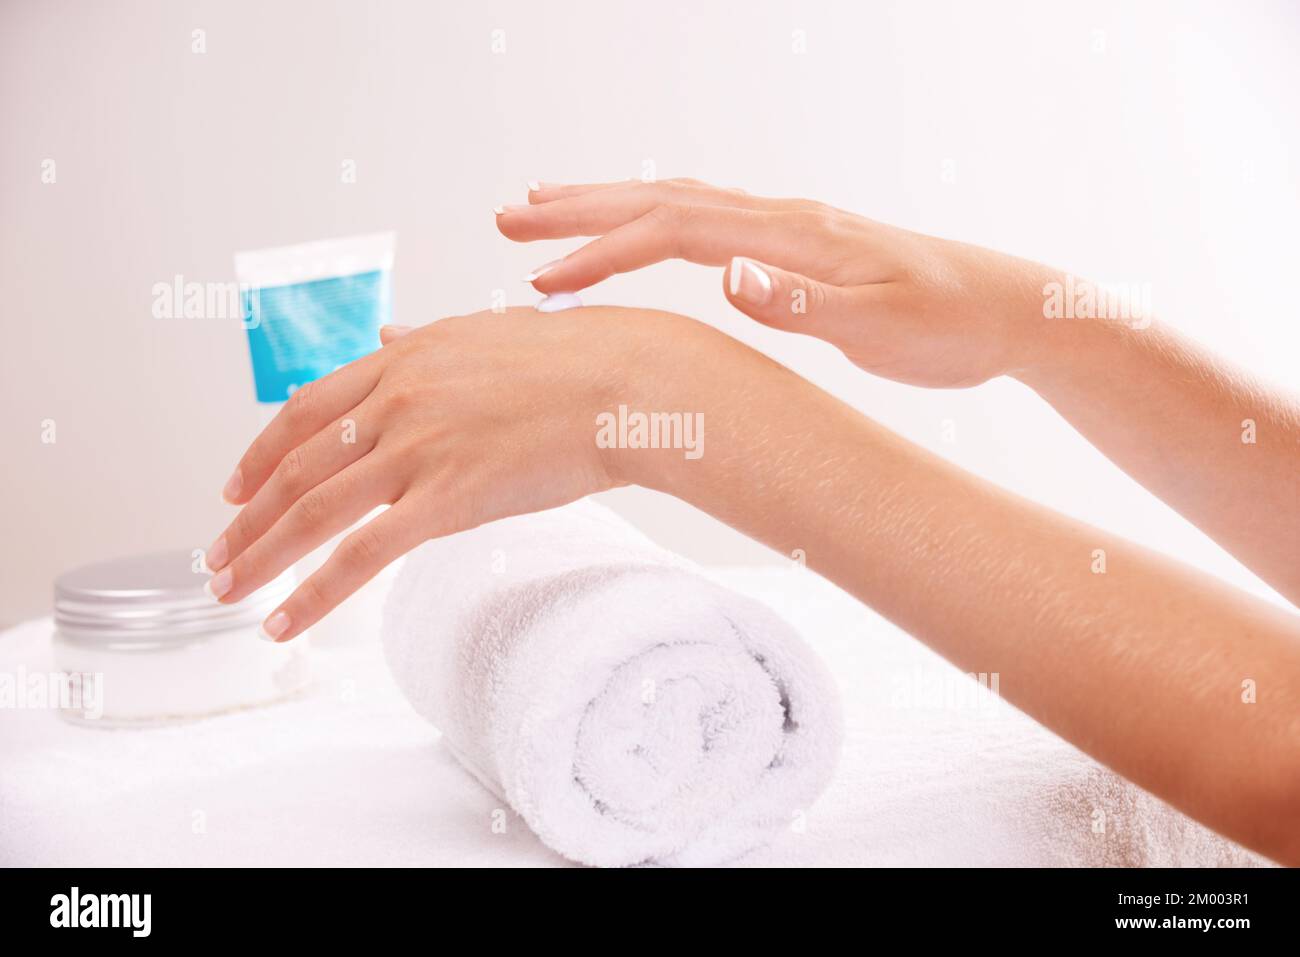 My hands are the main attraction. a woman applying lotion to her hands. Stock Photo